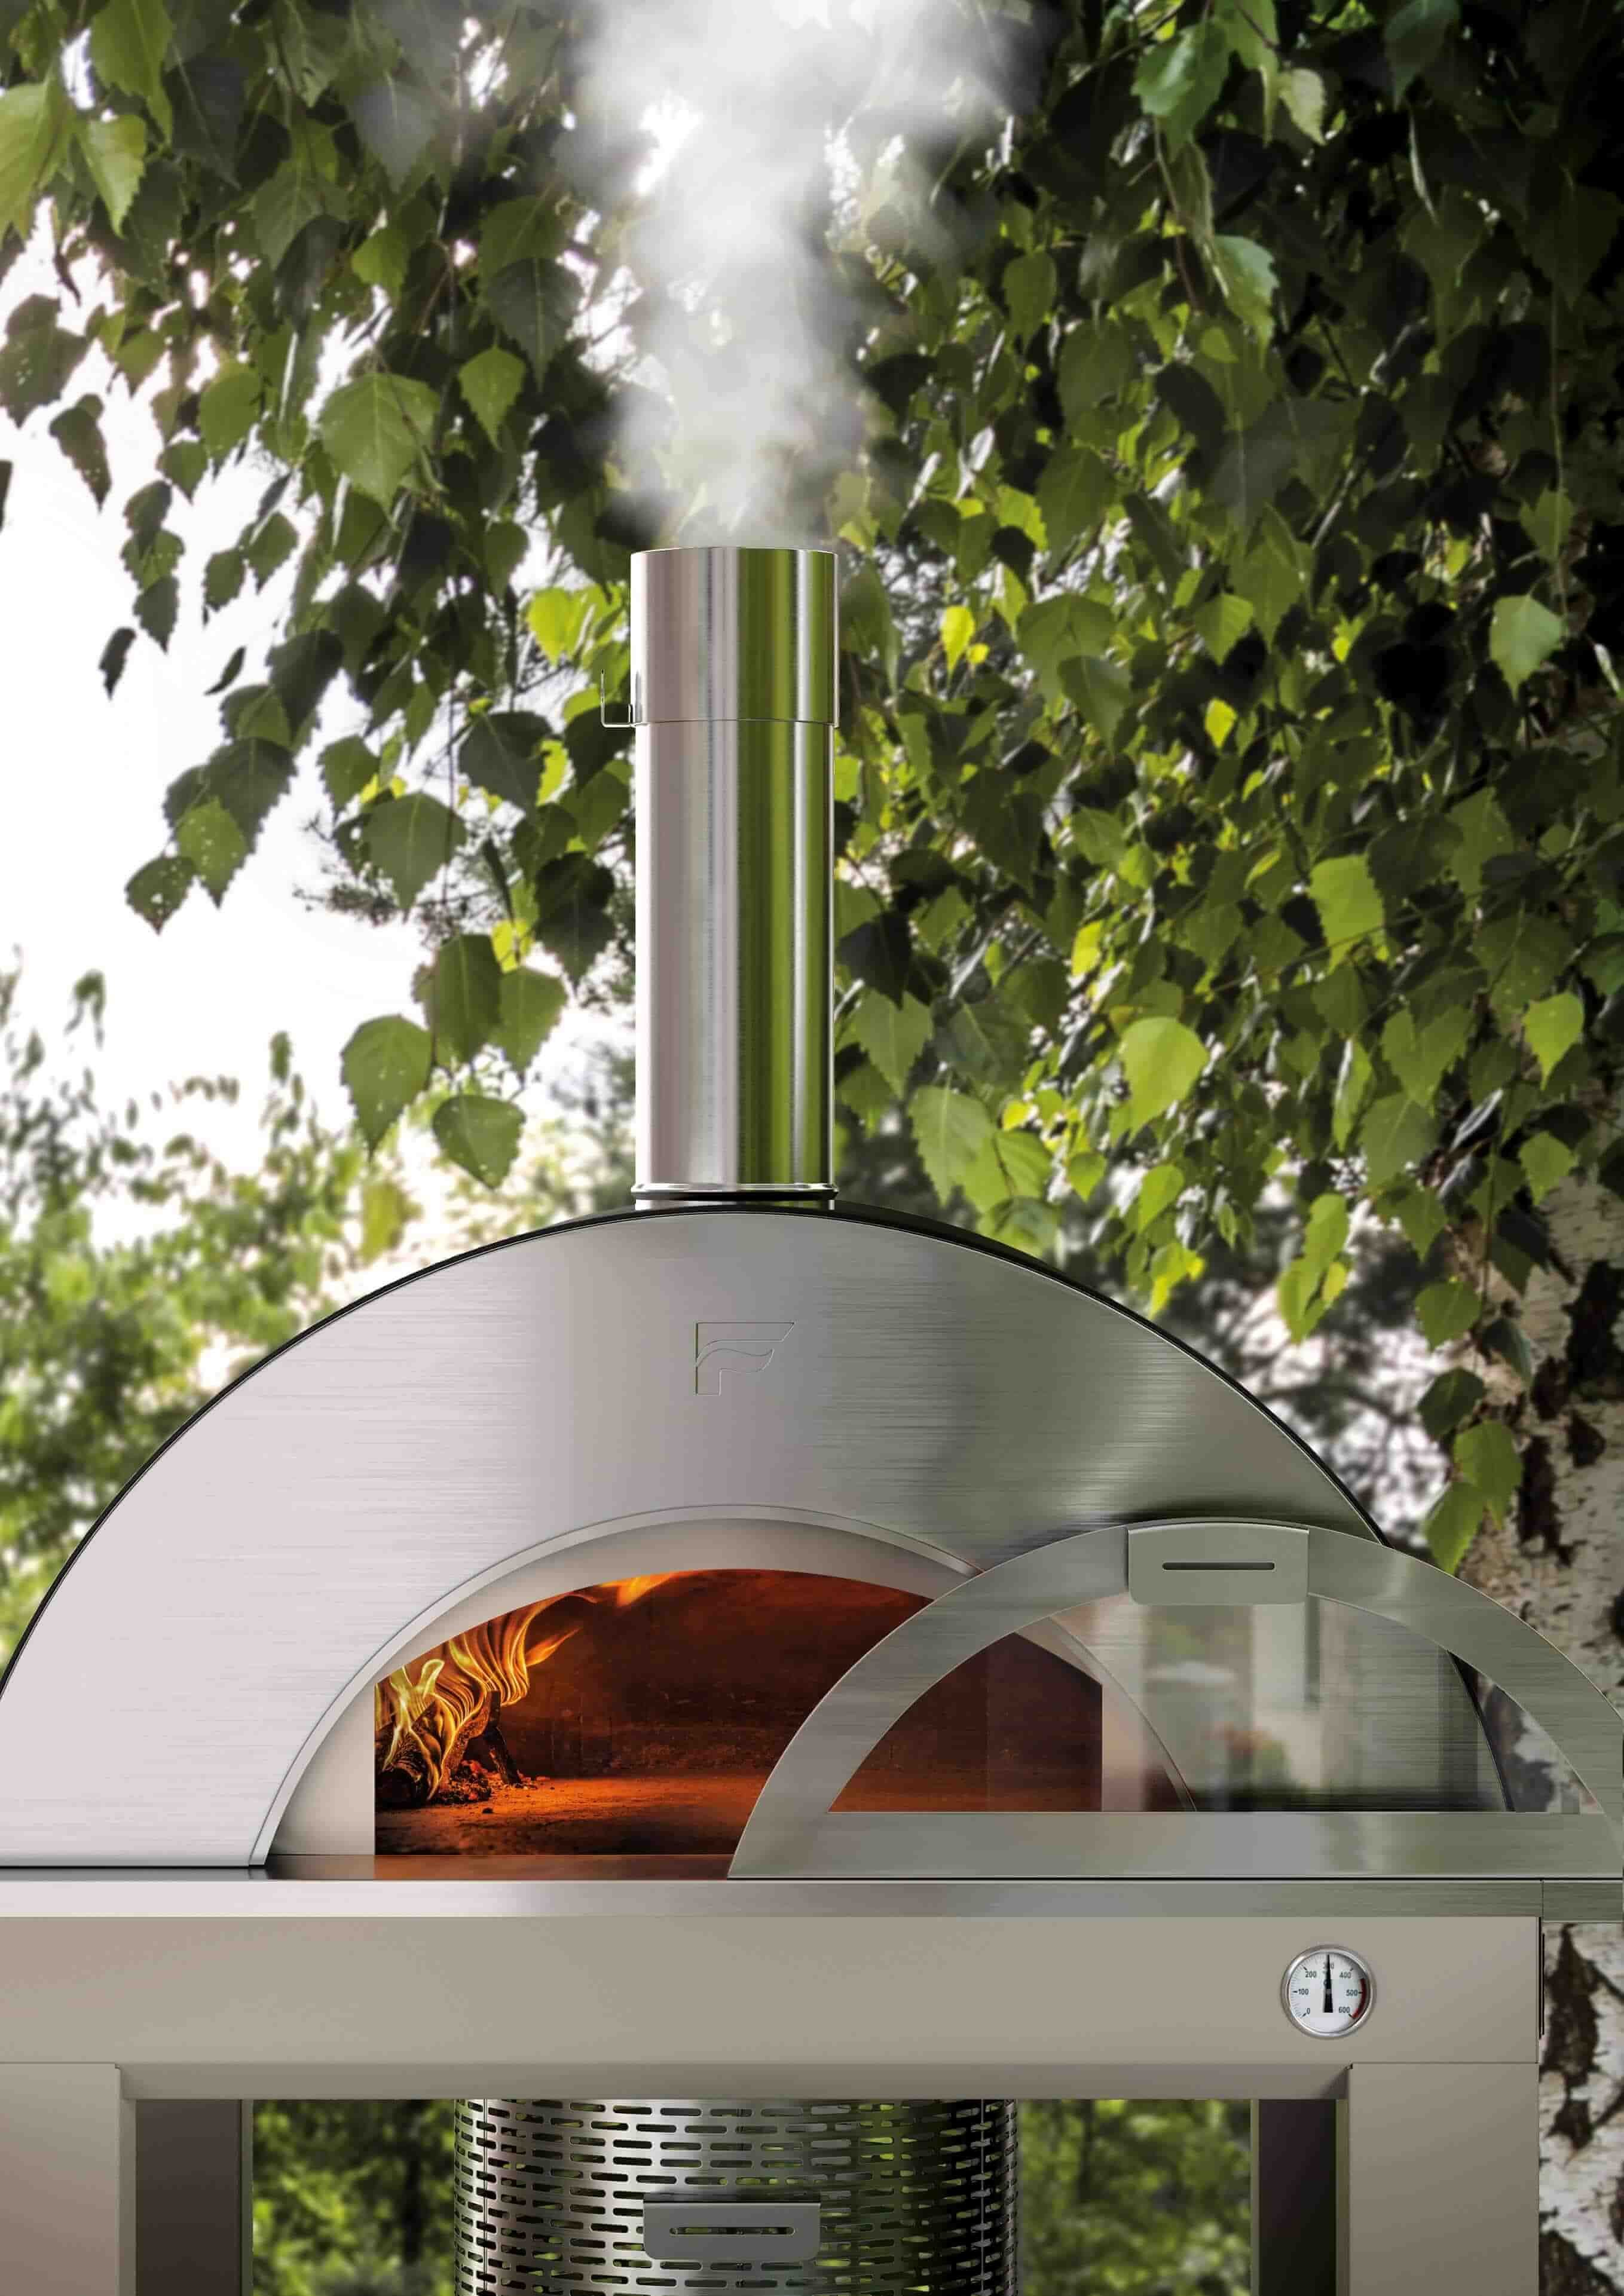 Fontana Riviera, pizza oven and dome oven with wood firing, 80x60cm oven cavity